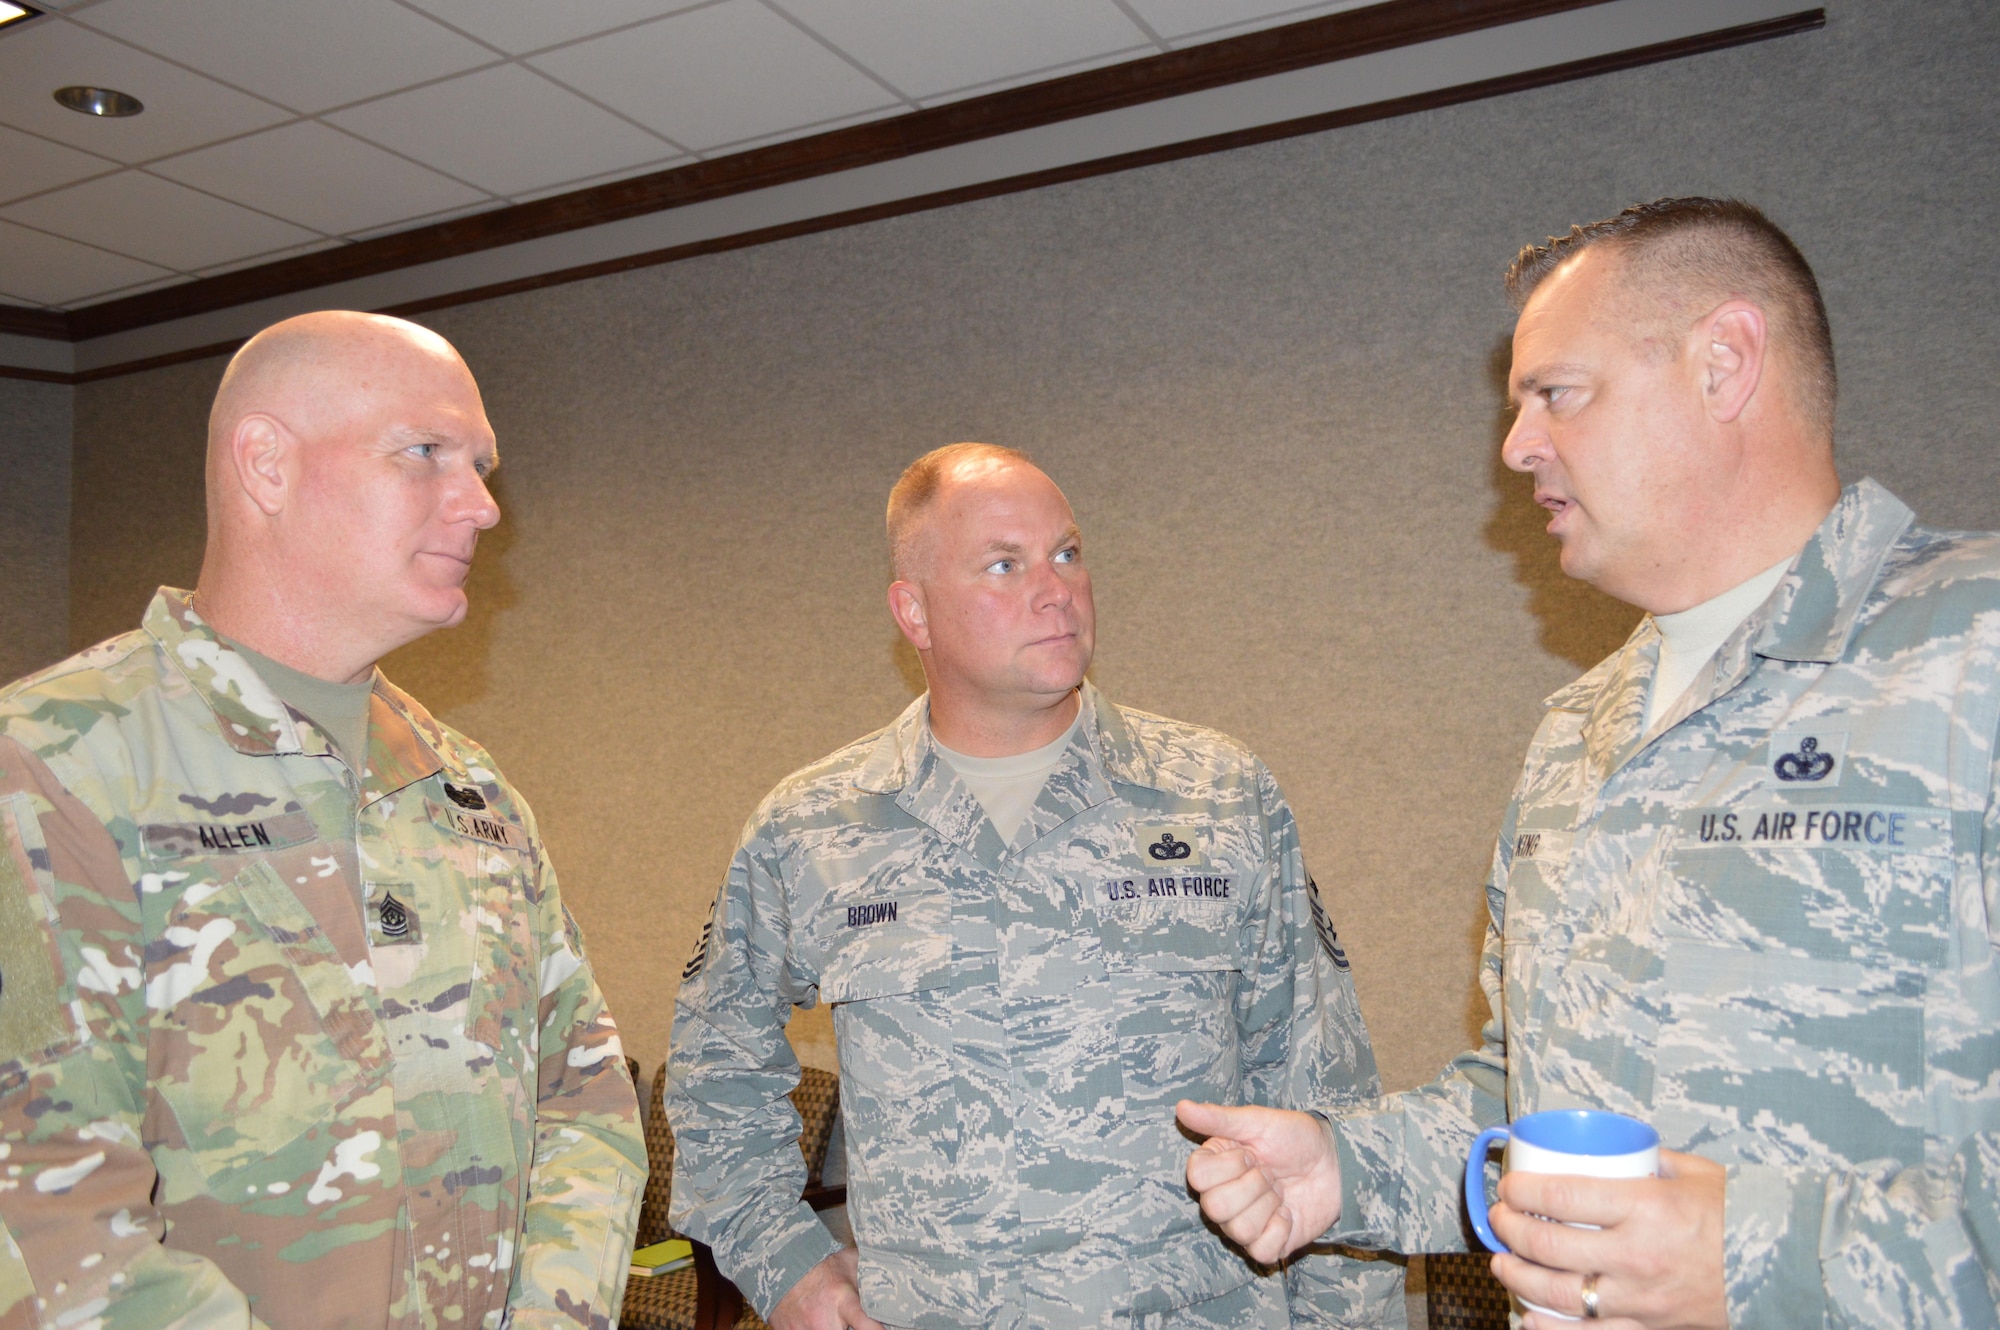 (From left) West Virginia Army National Guard Command Sergeant Maj. James Allen and Air National Guard Enlisted Force Advisory Council Chairman and Kansas National Guard Senior Enlisted Leader, Chief Master Sgt. James Brown, listen to a point by Chief Master Sgt. Richard King, Continental U.S. Aerospace Defense Region-1st Air Force (AFNORTH) Command Chief, during the Enlisted Force Advisory Council Meeting at Tyndall Air Force Base, Fla., Dec. 6-7. It was the first time a command sergeant major attended the Air National Guard EFAC event as it was determined similar issues for enlisted forces existed across both armed service brances. Brown will attend the next Army Command Sergeant Major Advisory Council meeting. (Photo by Mary McHale)